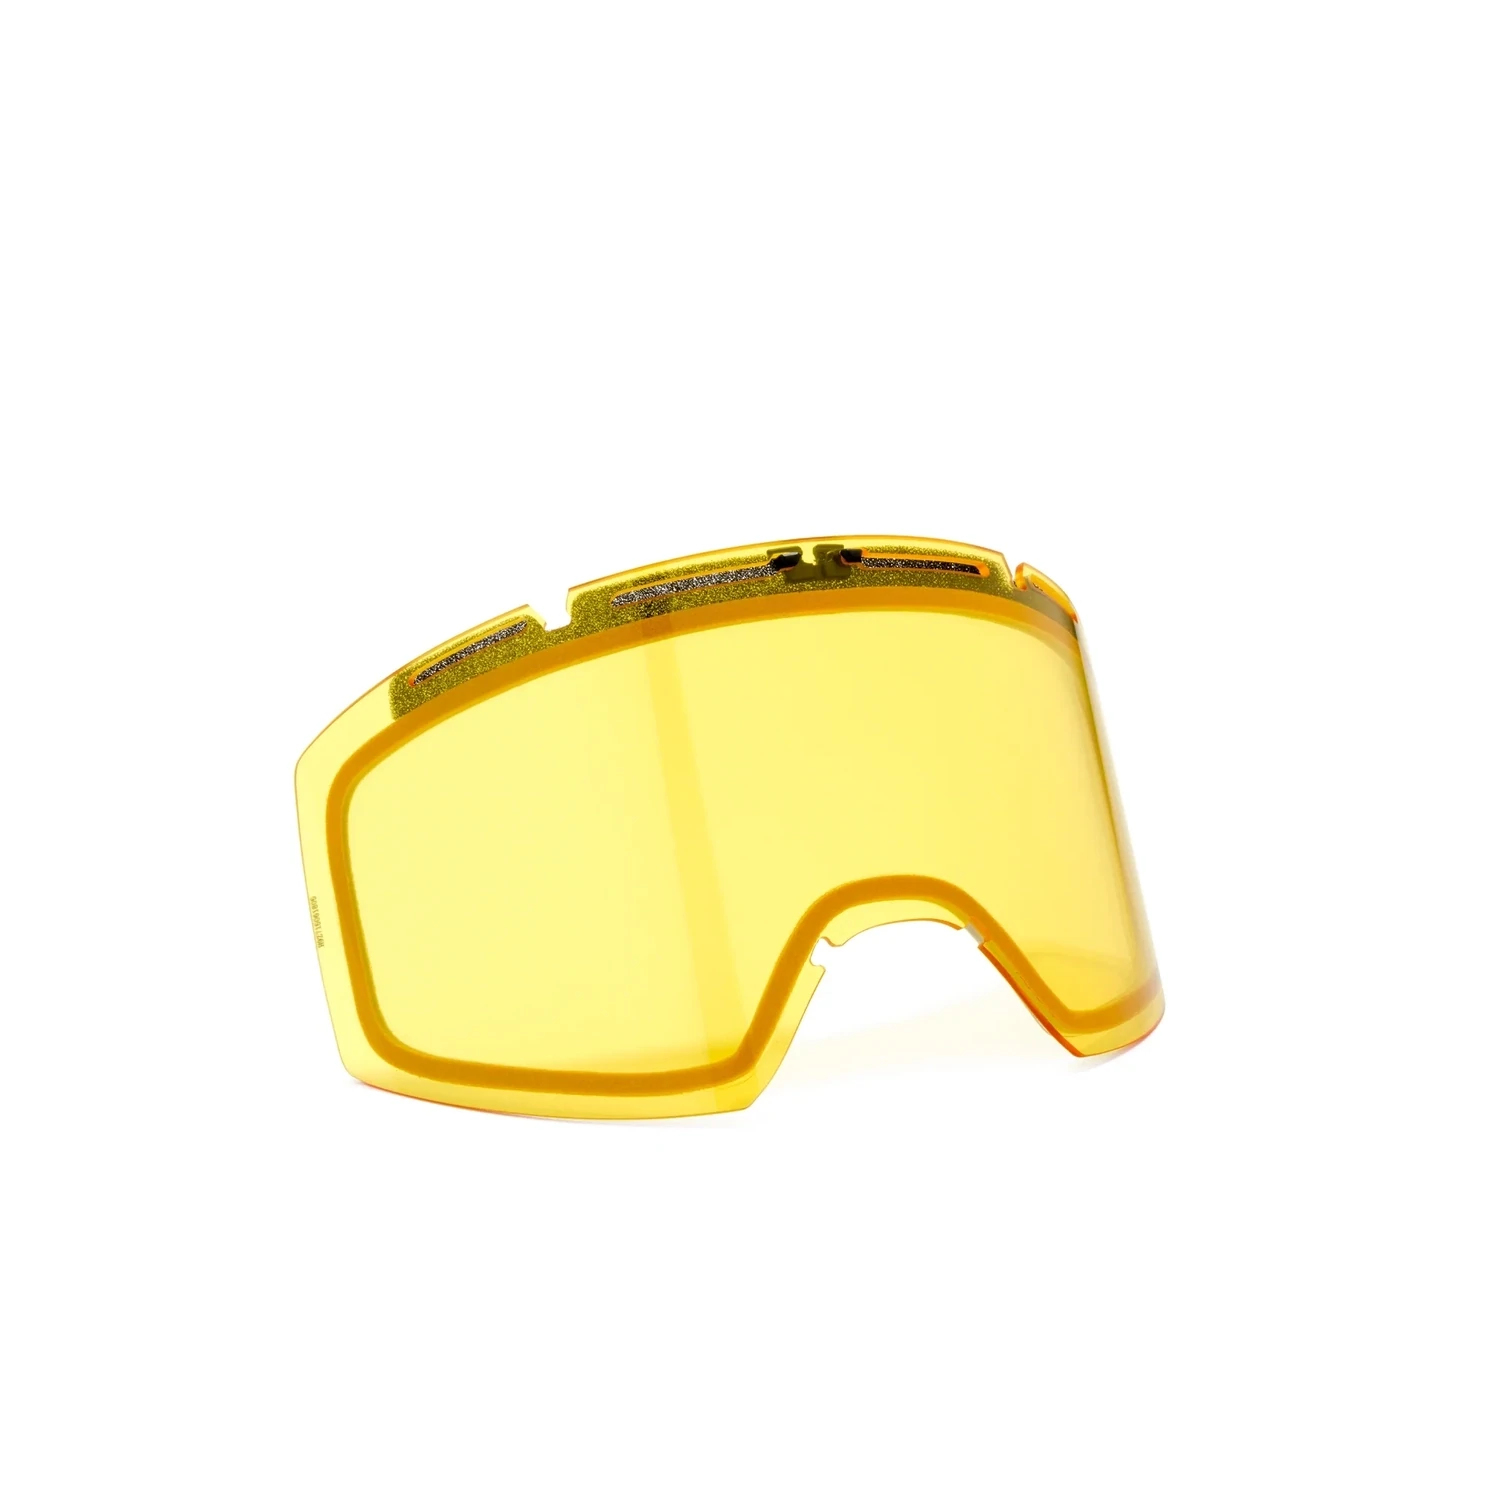 SHRED AMAZIFY DOUBLE LENS, Color: YELLOW